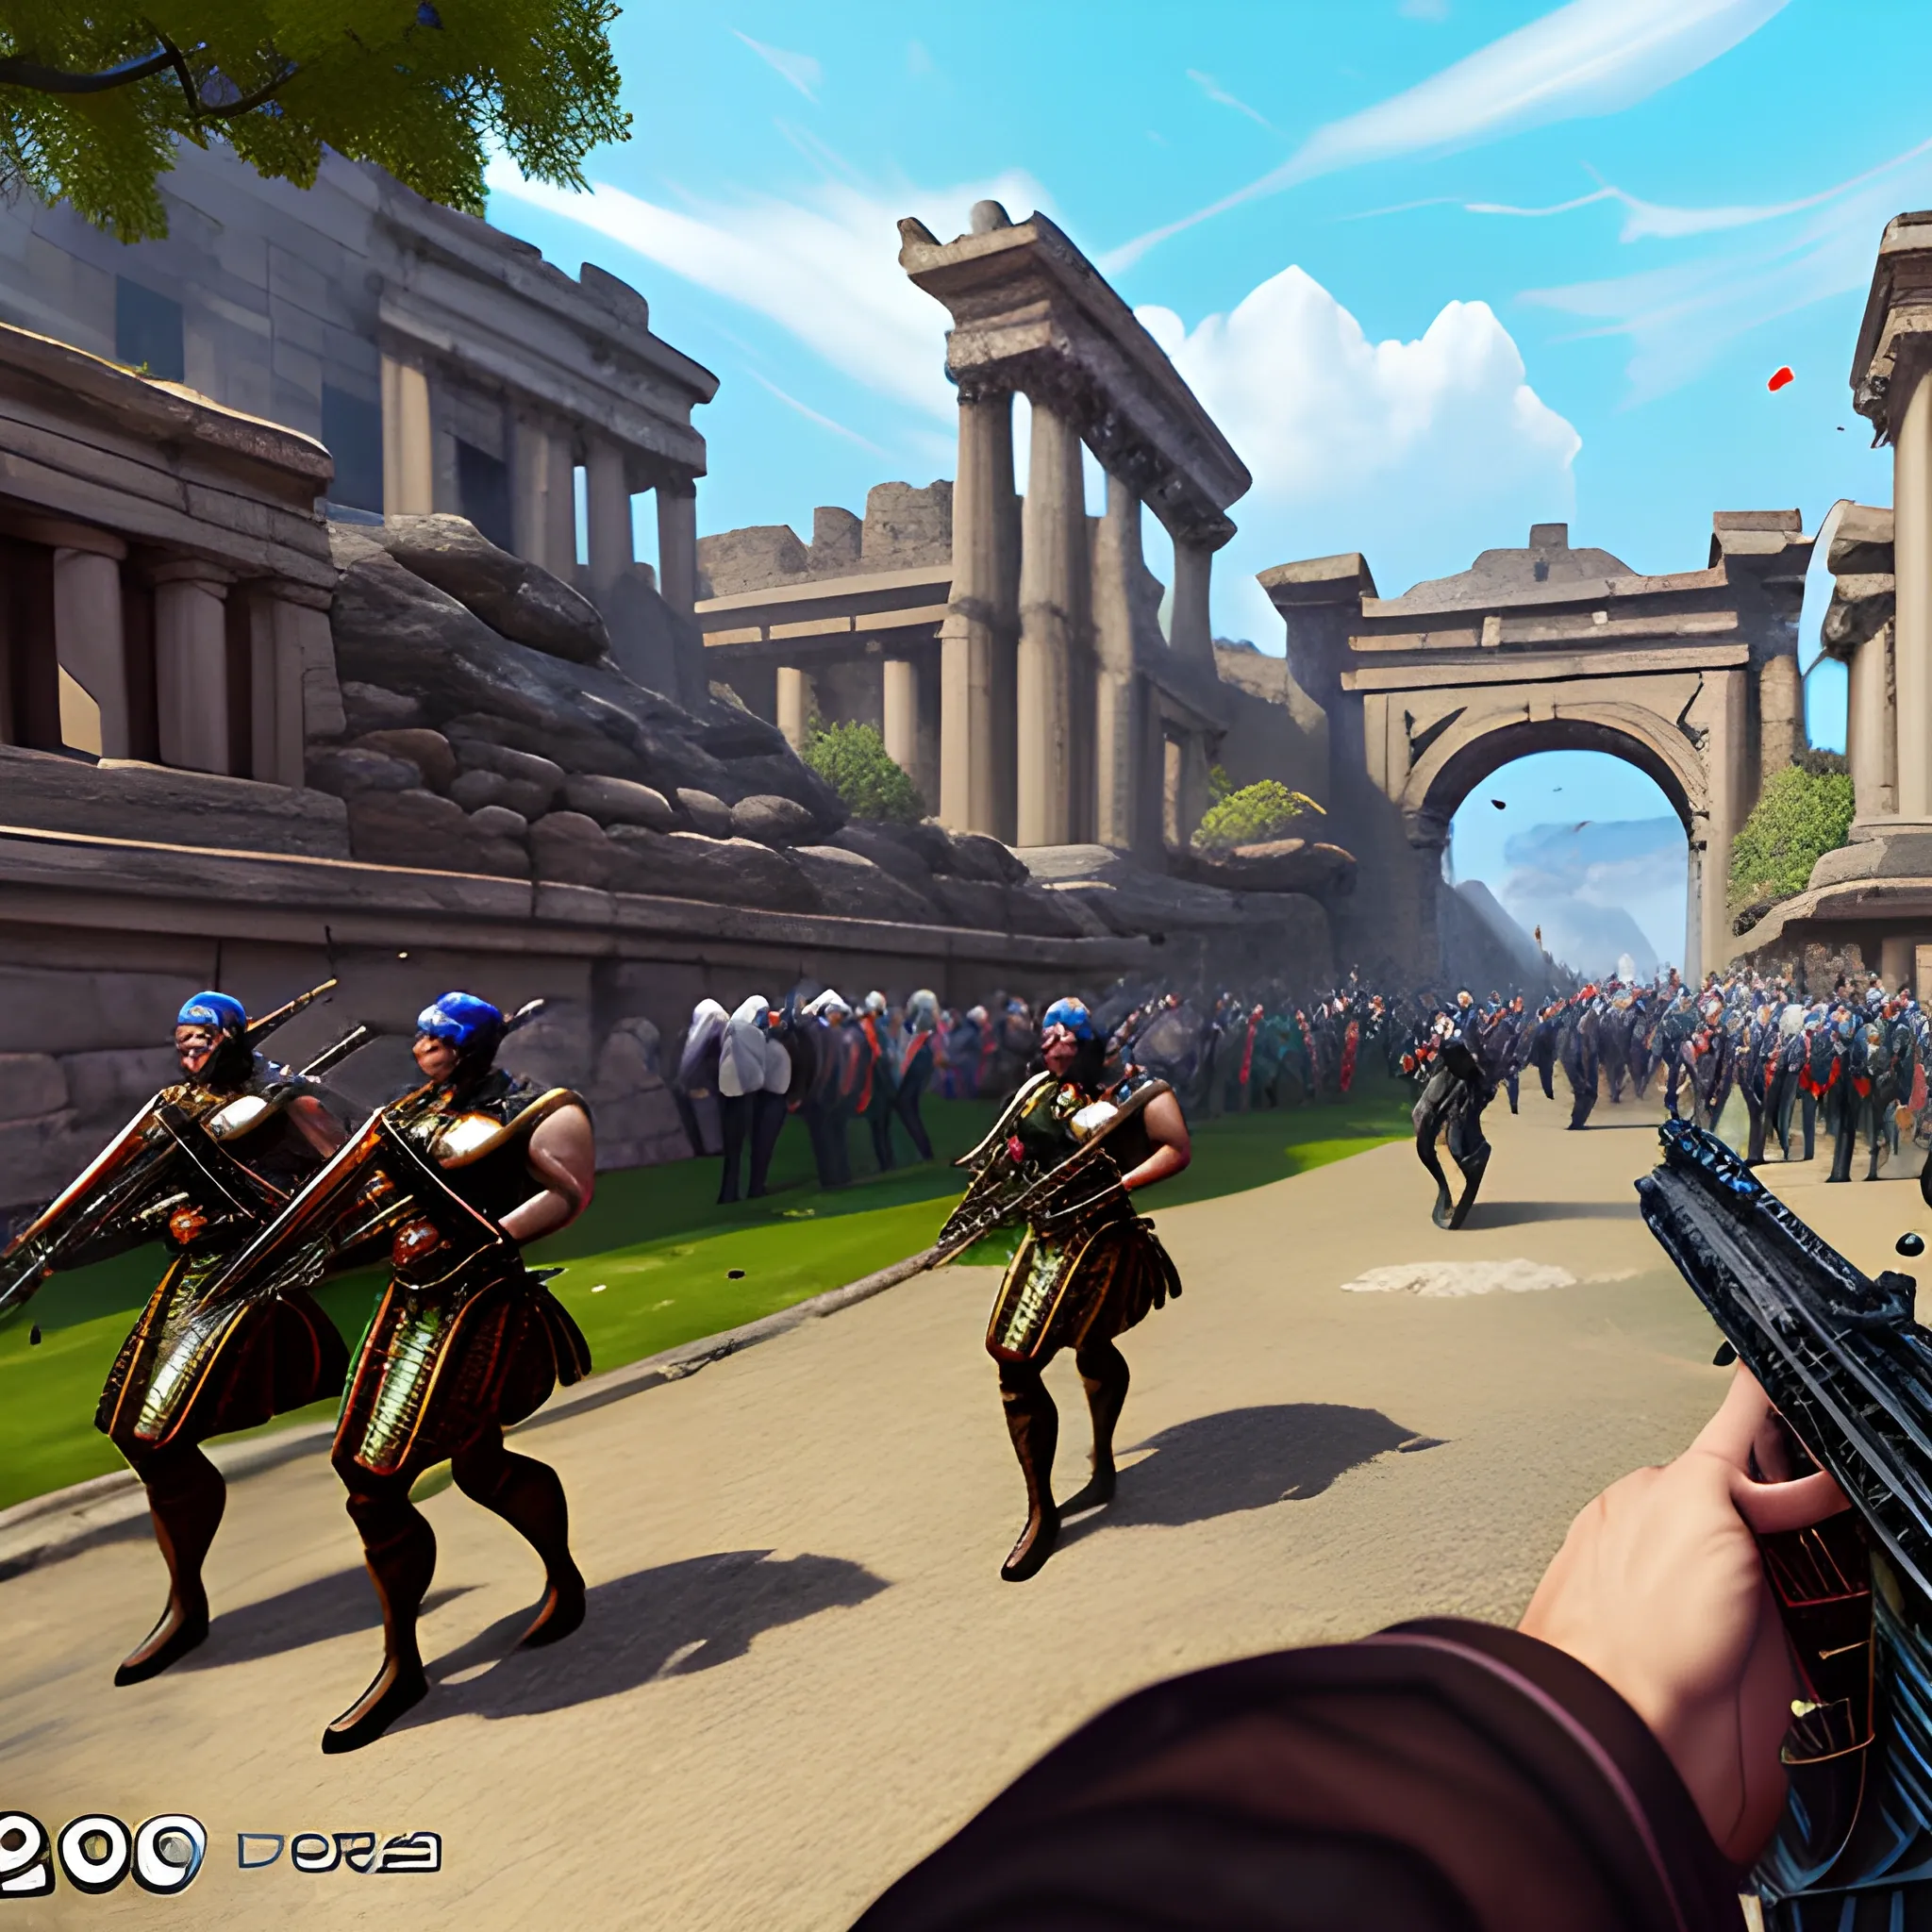 videogame screenshot with huge spangly sparkly double bassoon assault rifle in foreground, with young mothers pushing perambulators, in a municipal park, in the ancient world, very detailed